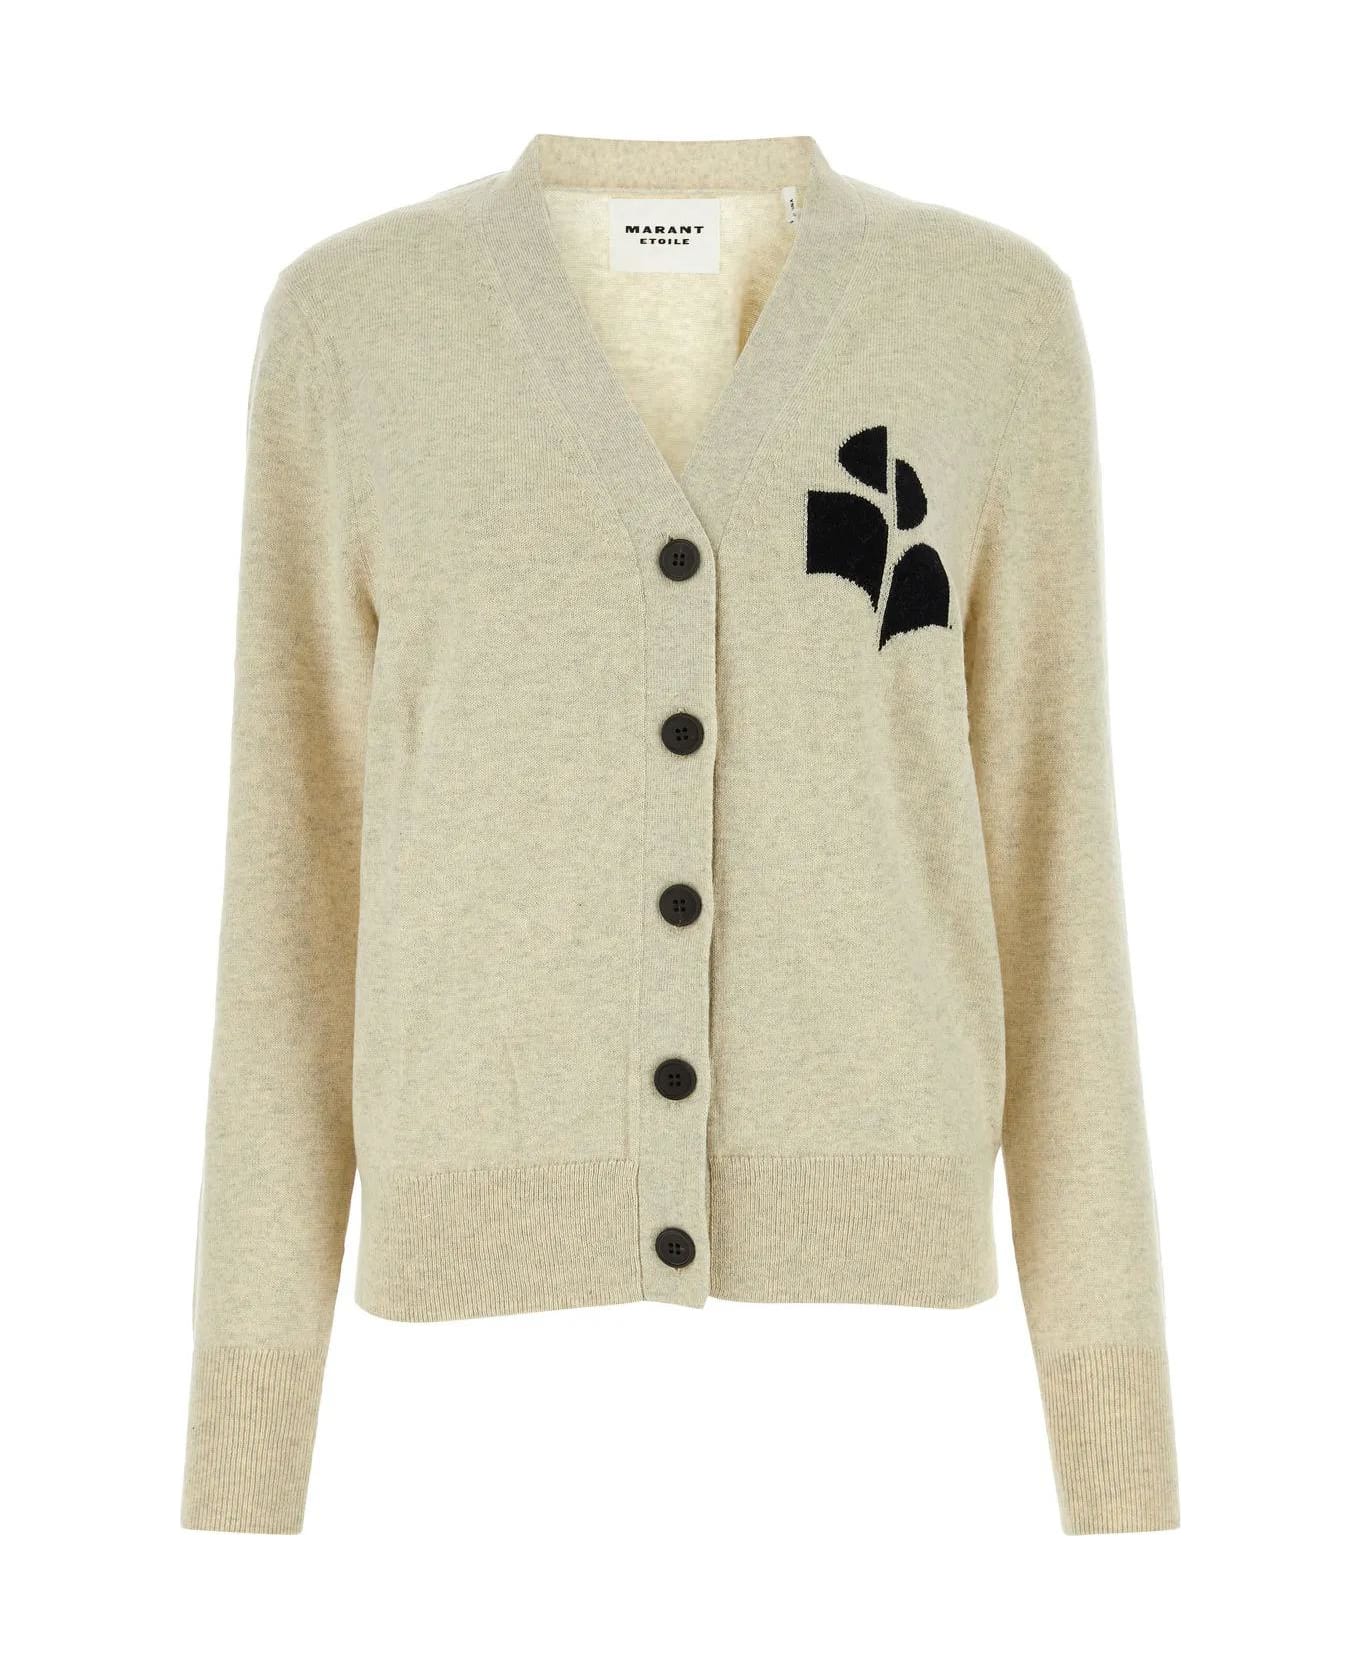 Marant Étoile Cotton And Wool Cardigan With Melange Effect - Gray